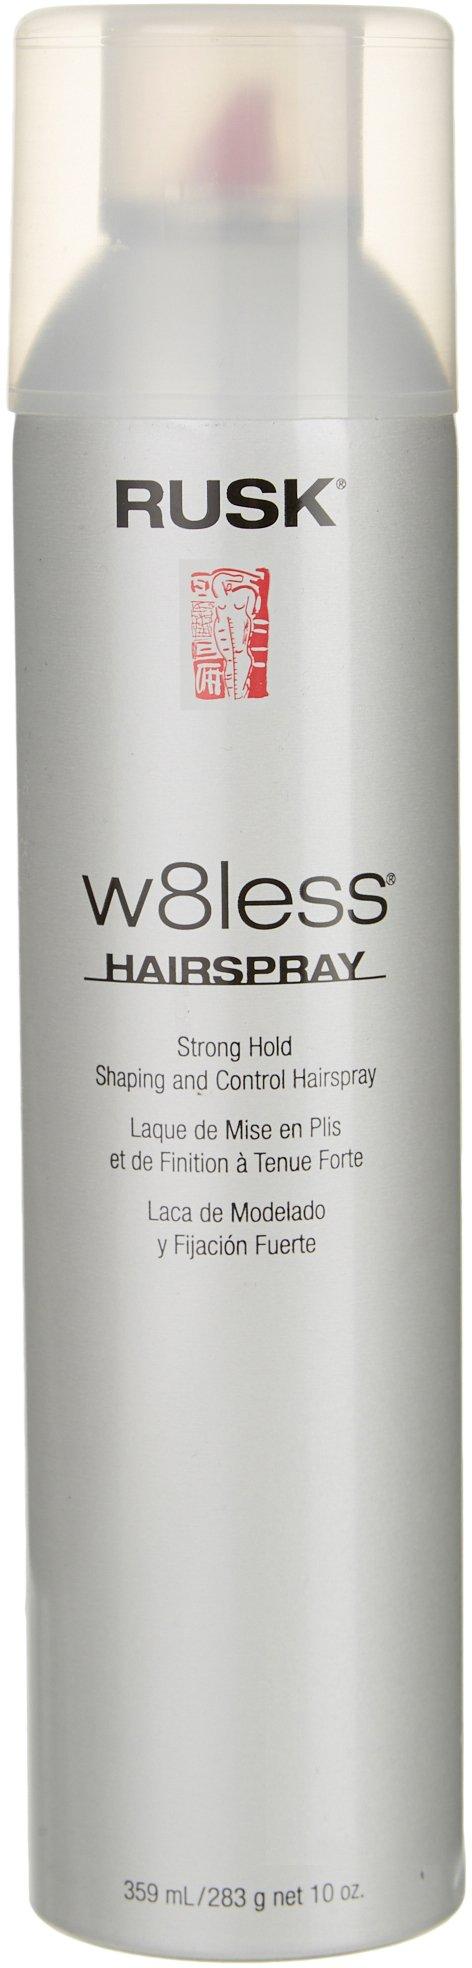 Rusk W8less Strong Hold Hairspray 10 oz.